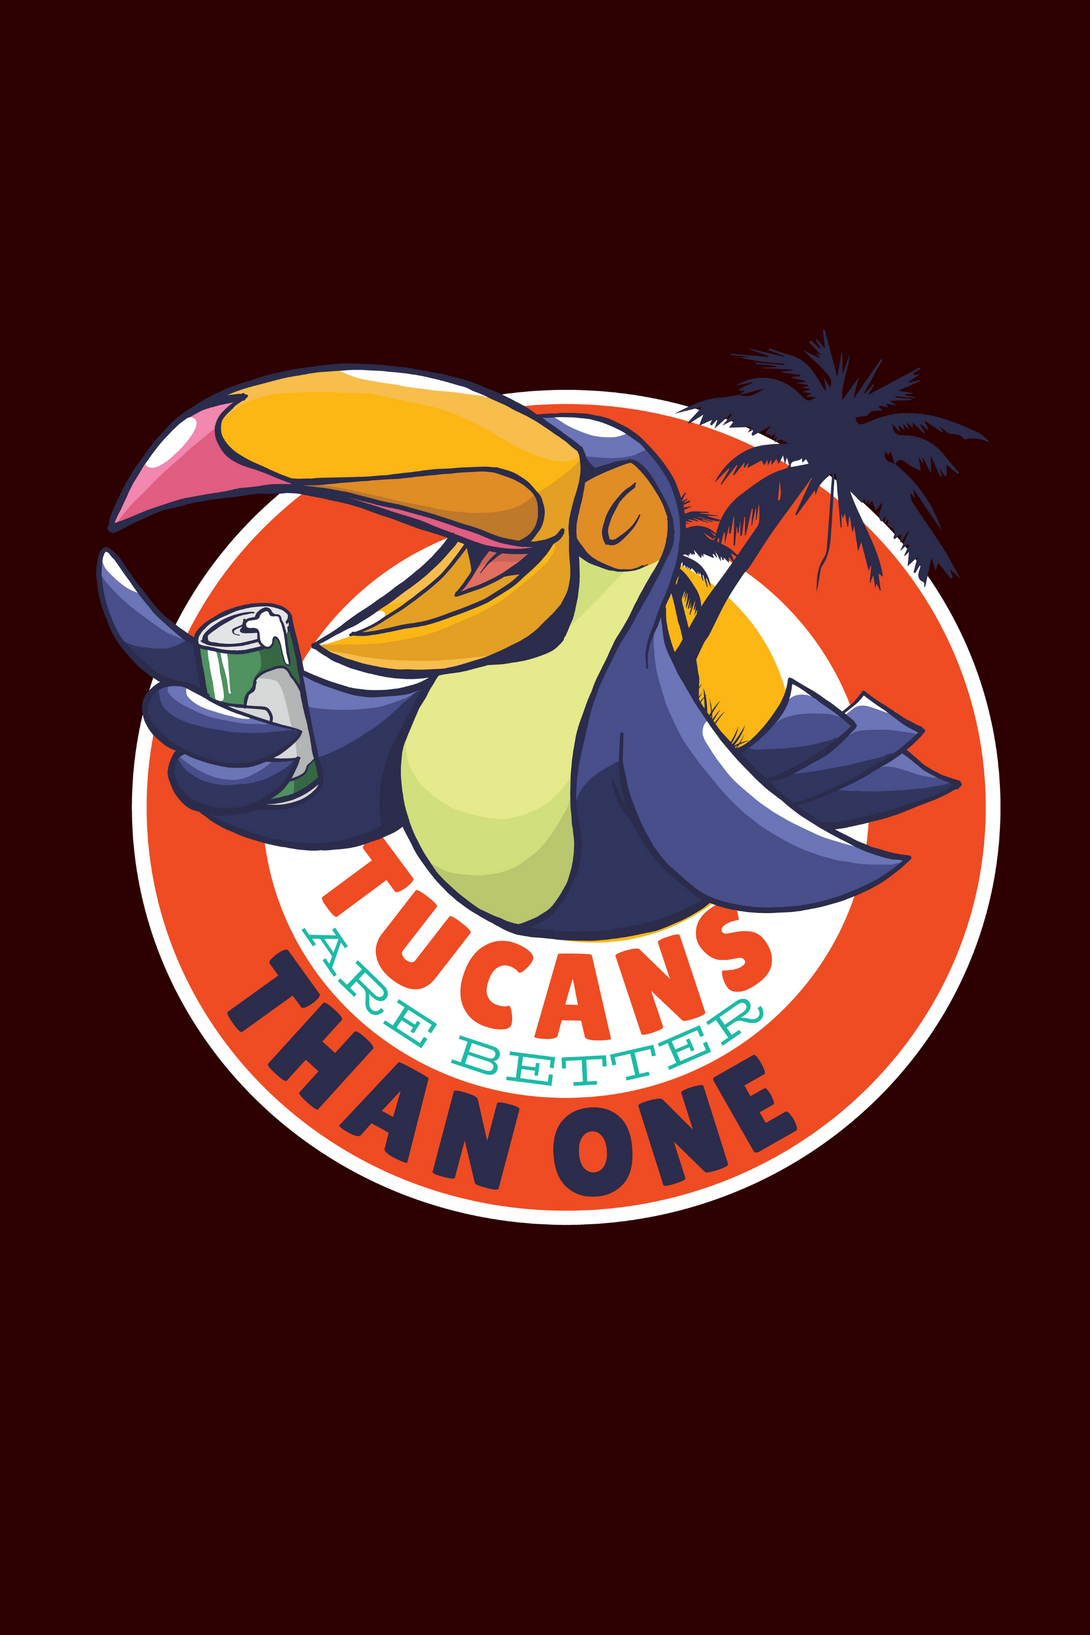 Tucans Are Better Tha One Printed T-Shirt For Men - WowWaves - 1